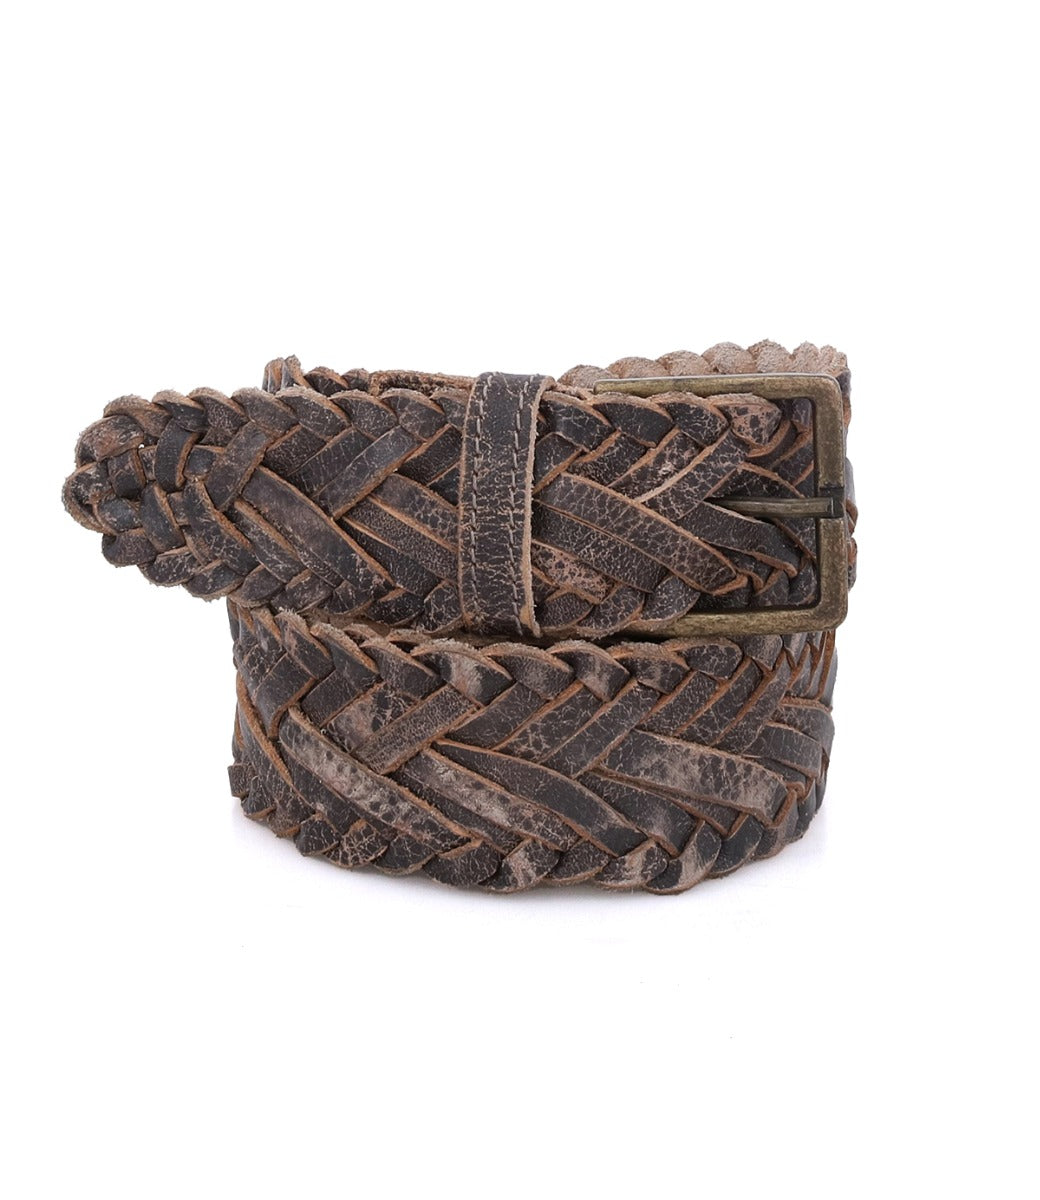 A braided leather belt with a metal buckle, the Proem by Bed Stu.